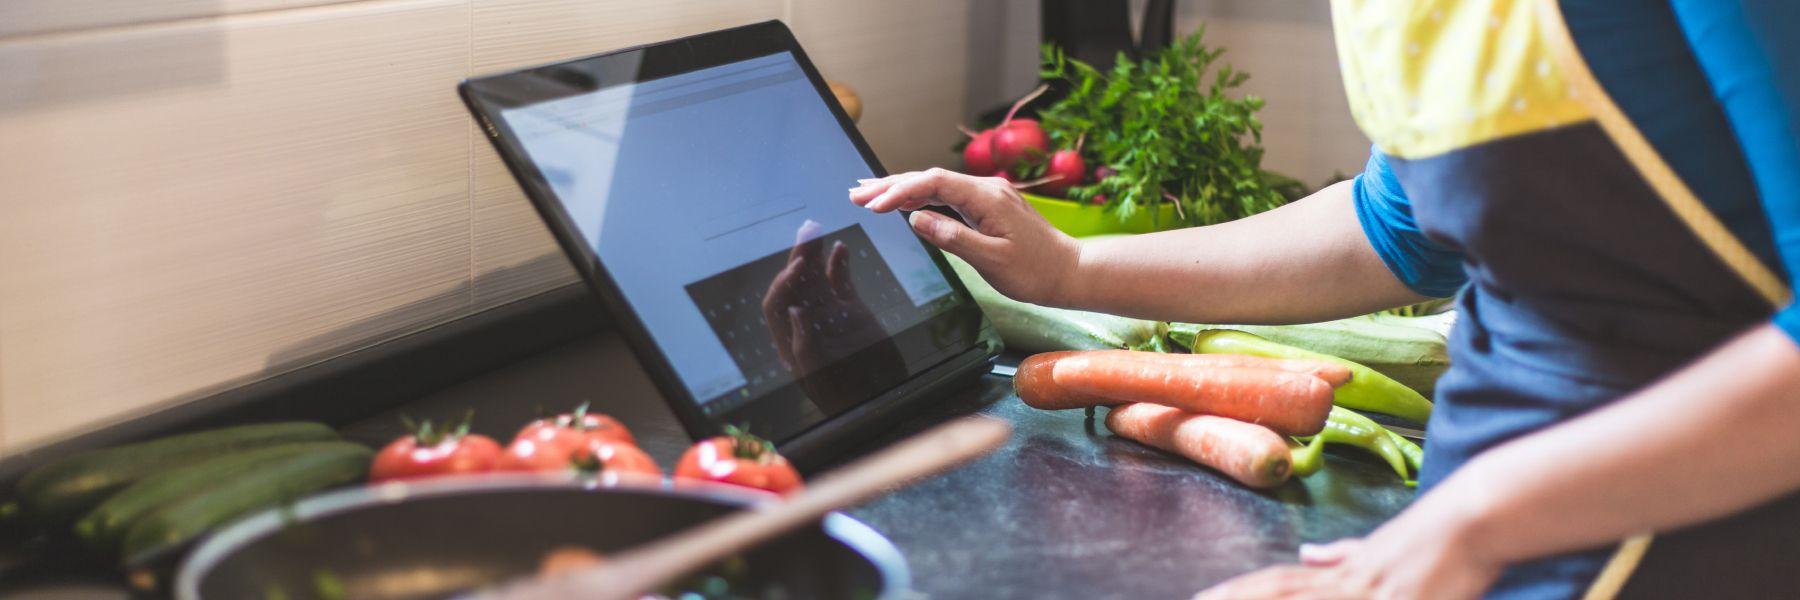 A person using a tablet in the kitchen with vegetables nearby